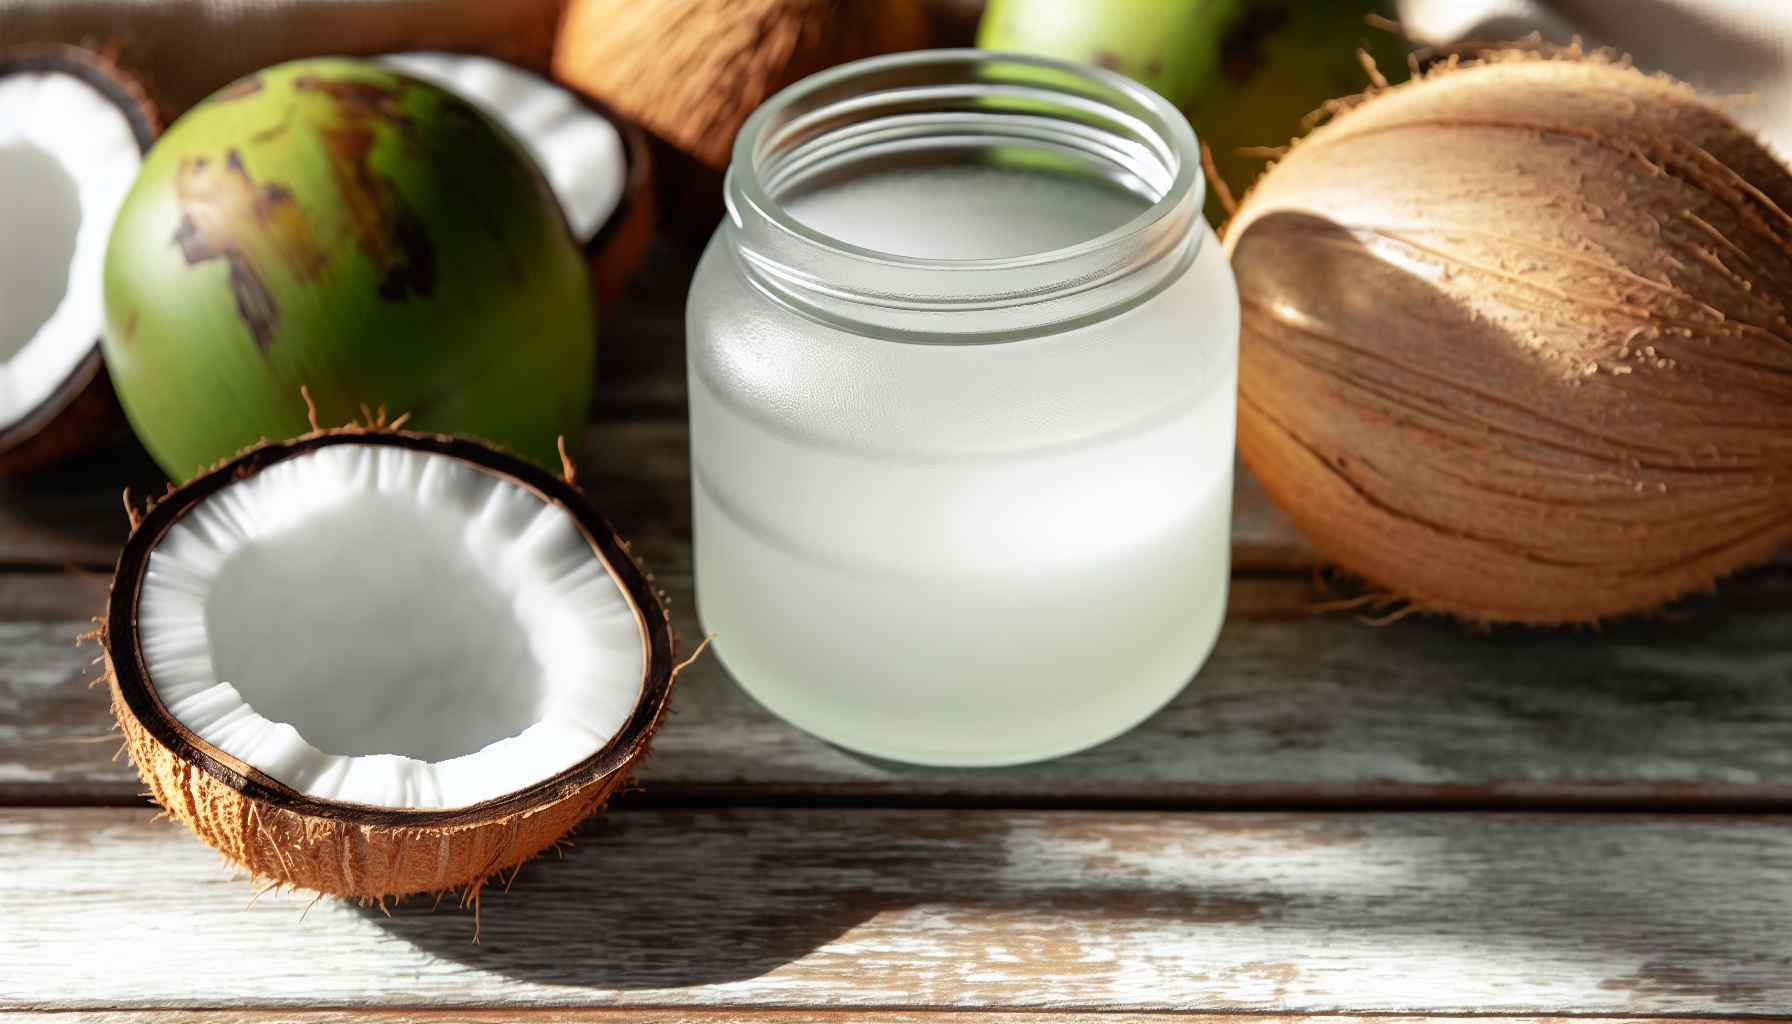 A jar of organic coconut oil surrounded by fresh coconuts